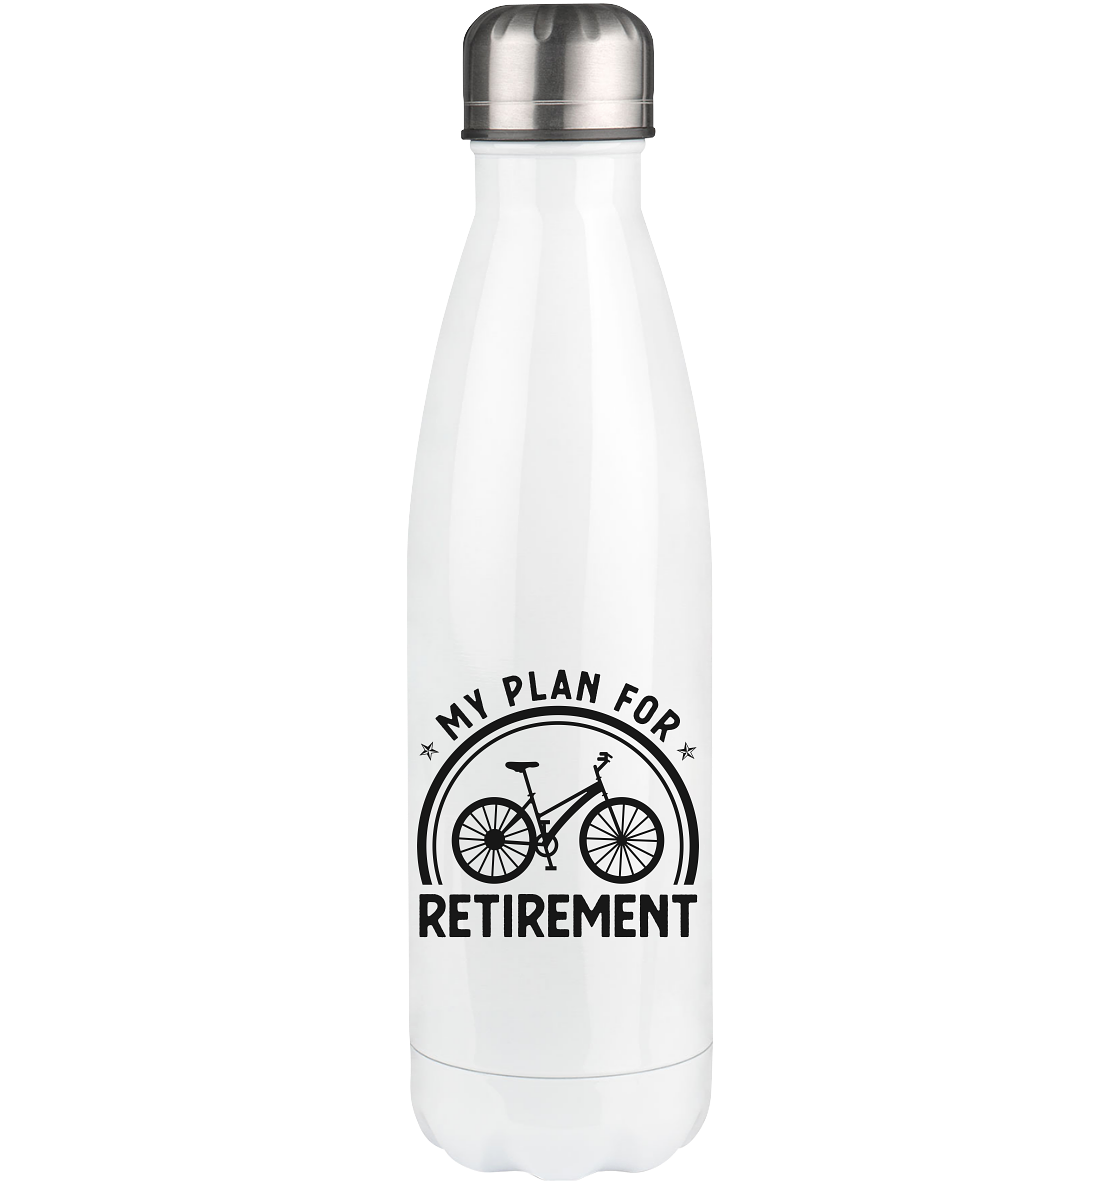 My Plan For Retirement - Edelstahl Thermosflasche fahrrad 500ml